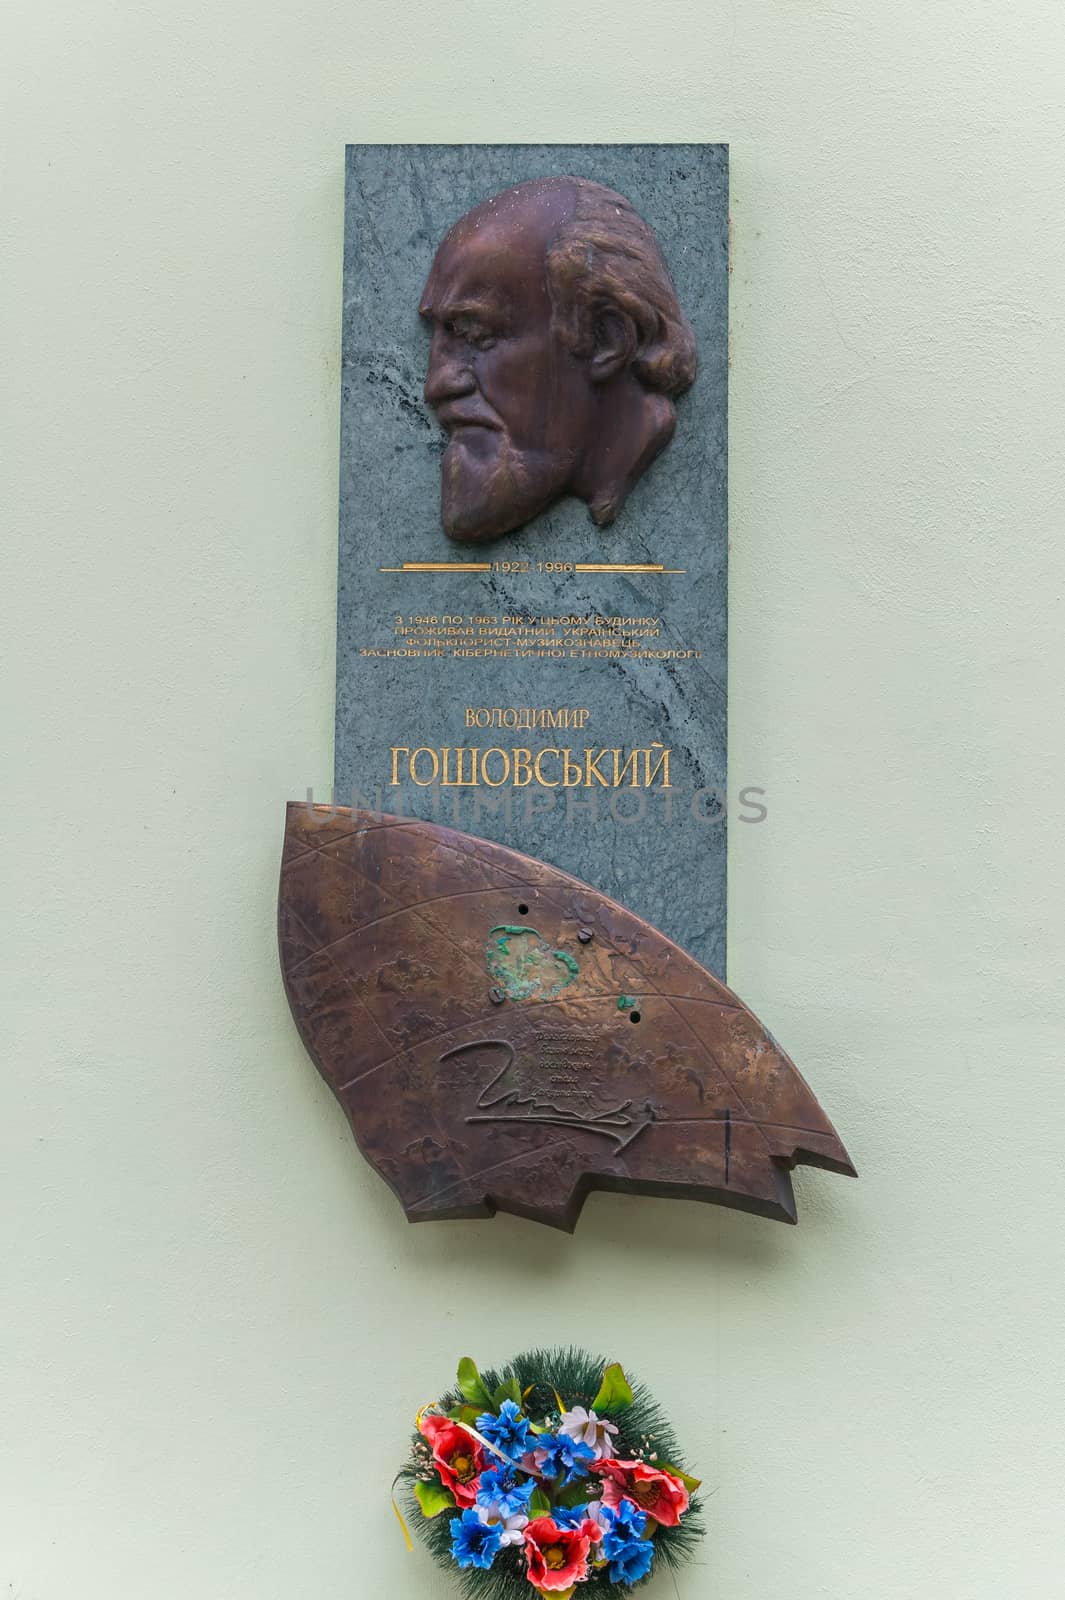 A commemorative plaque set on the wall by an outstanding musician with written years of his life and beautifully decorated with flowers underneath her. by Adamchuk